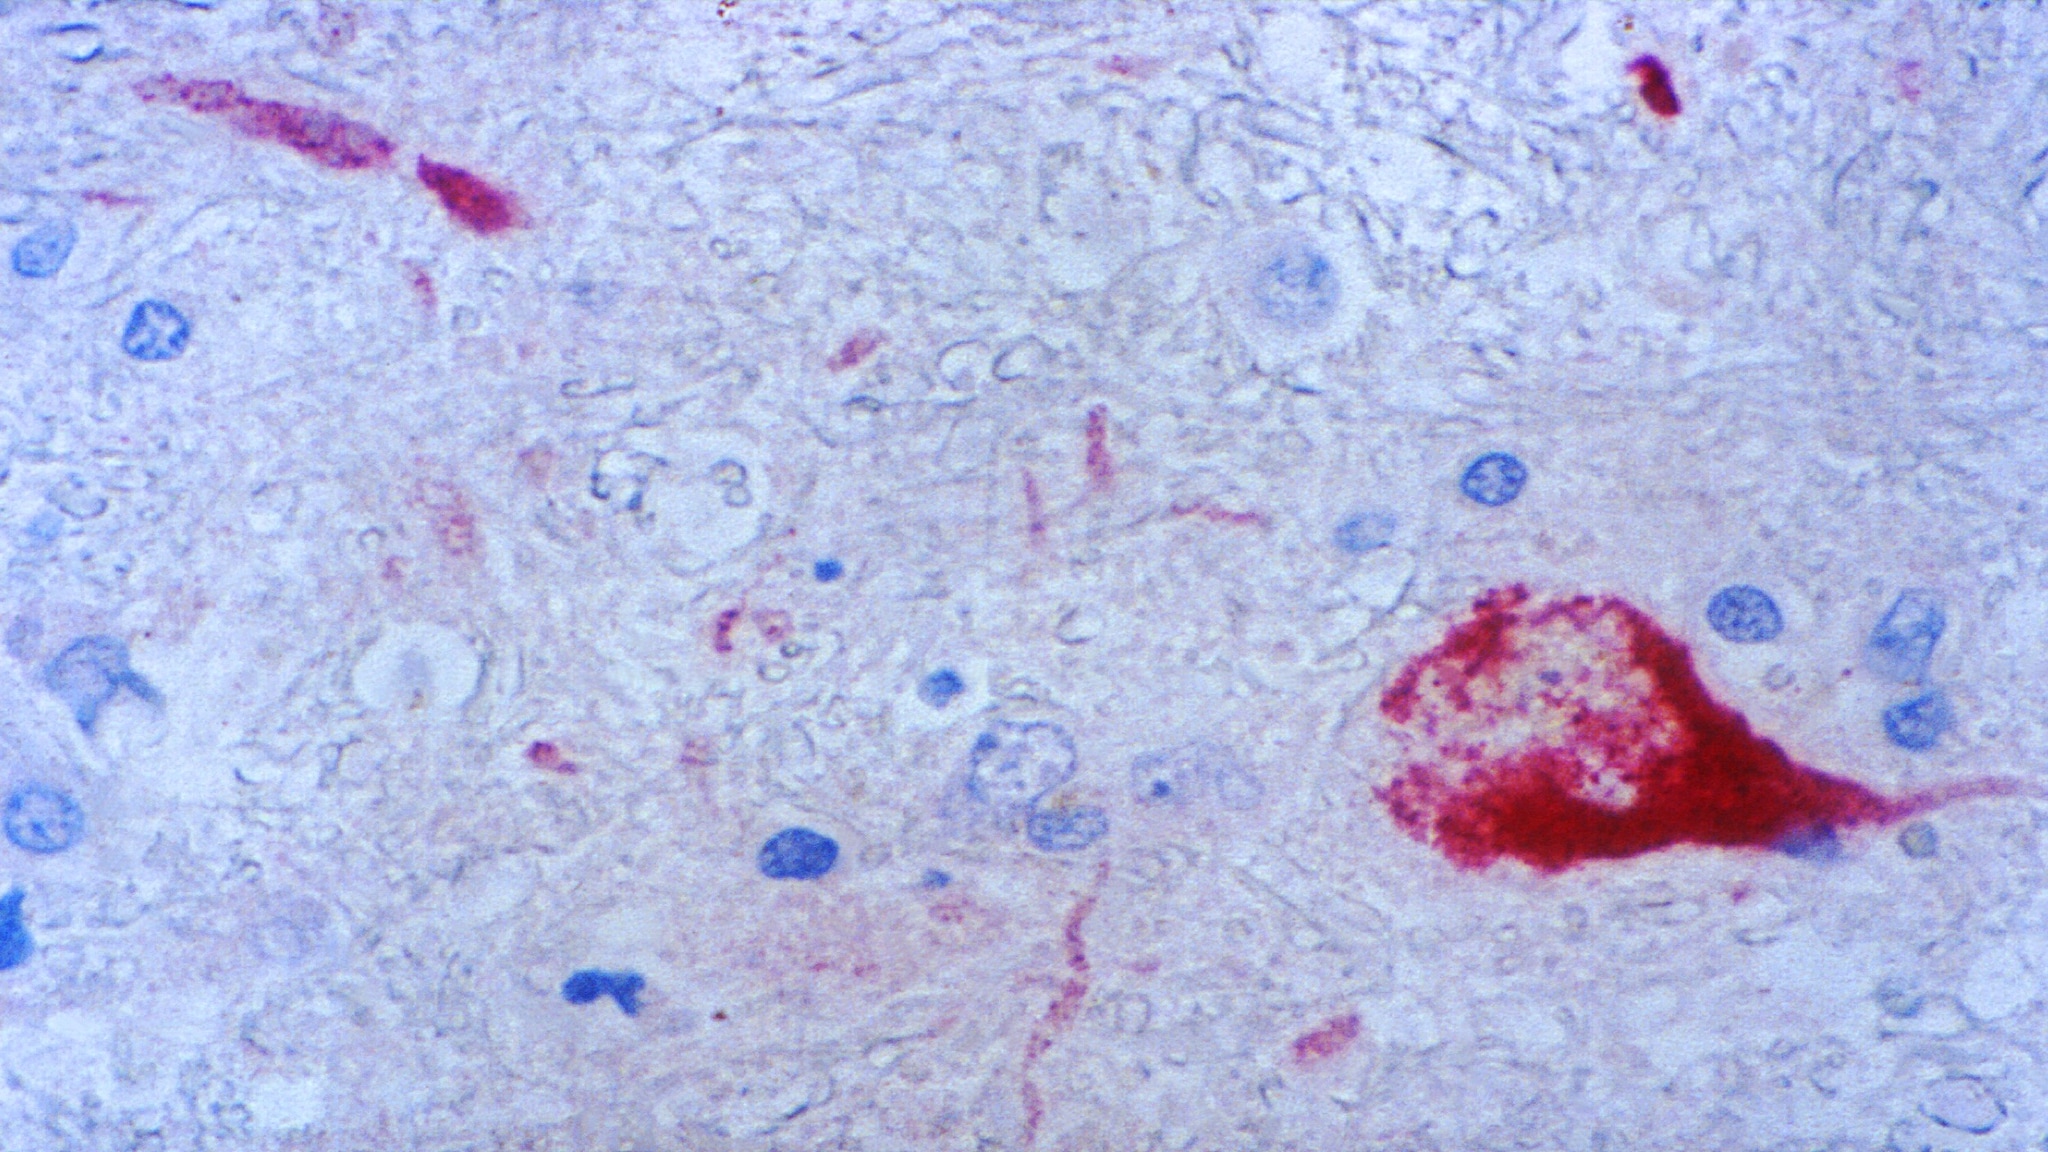 Using a histochemical technique in processing this tissue specimen, this photomicrographic image revealed the presence of the West Nile virus.